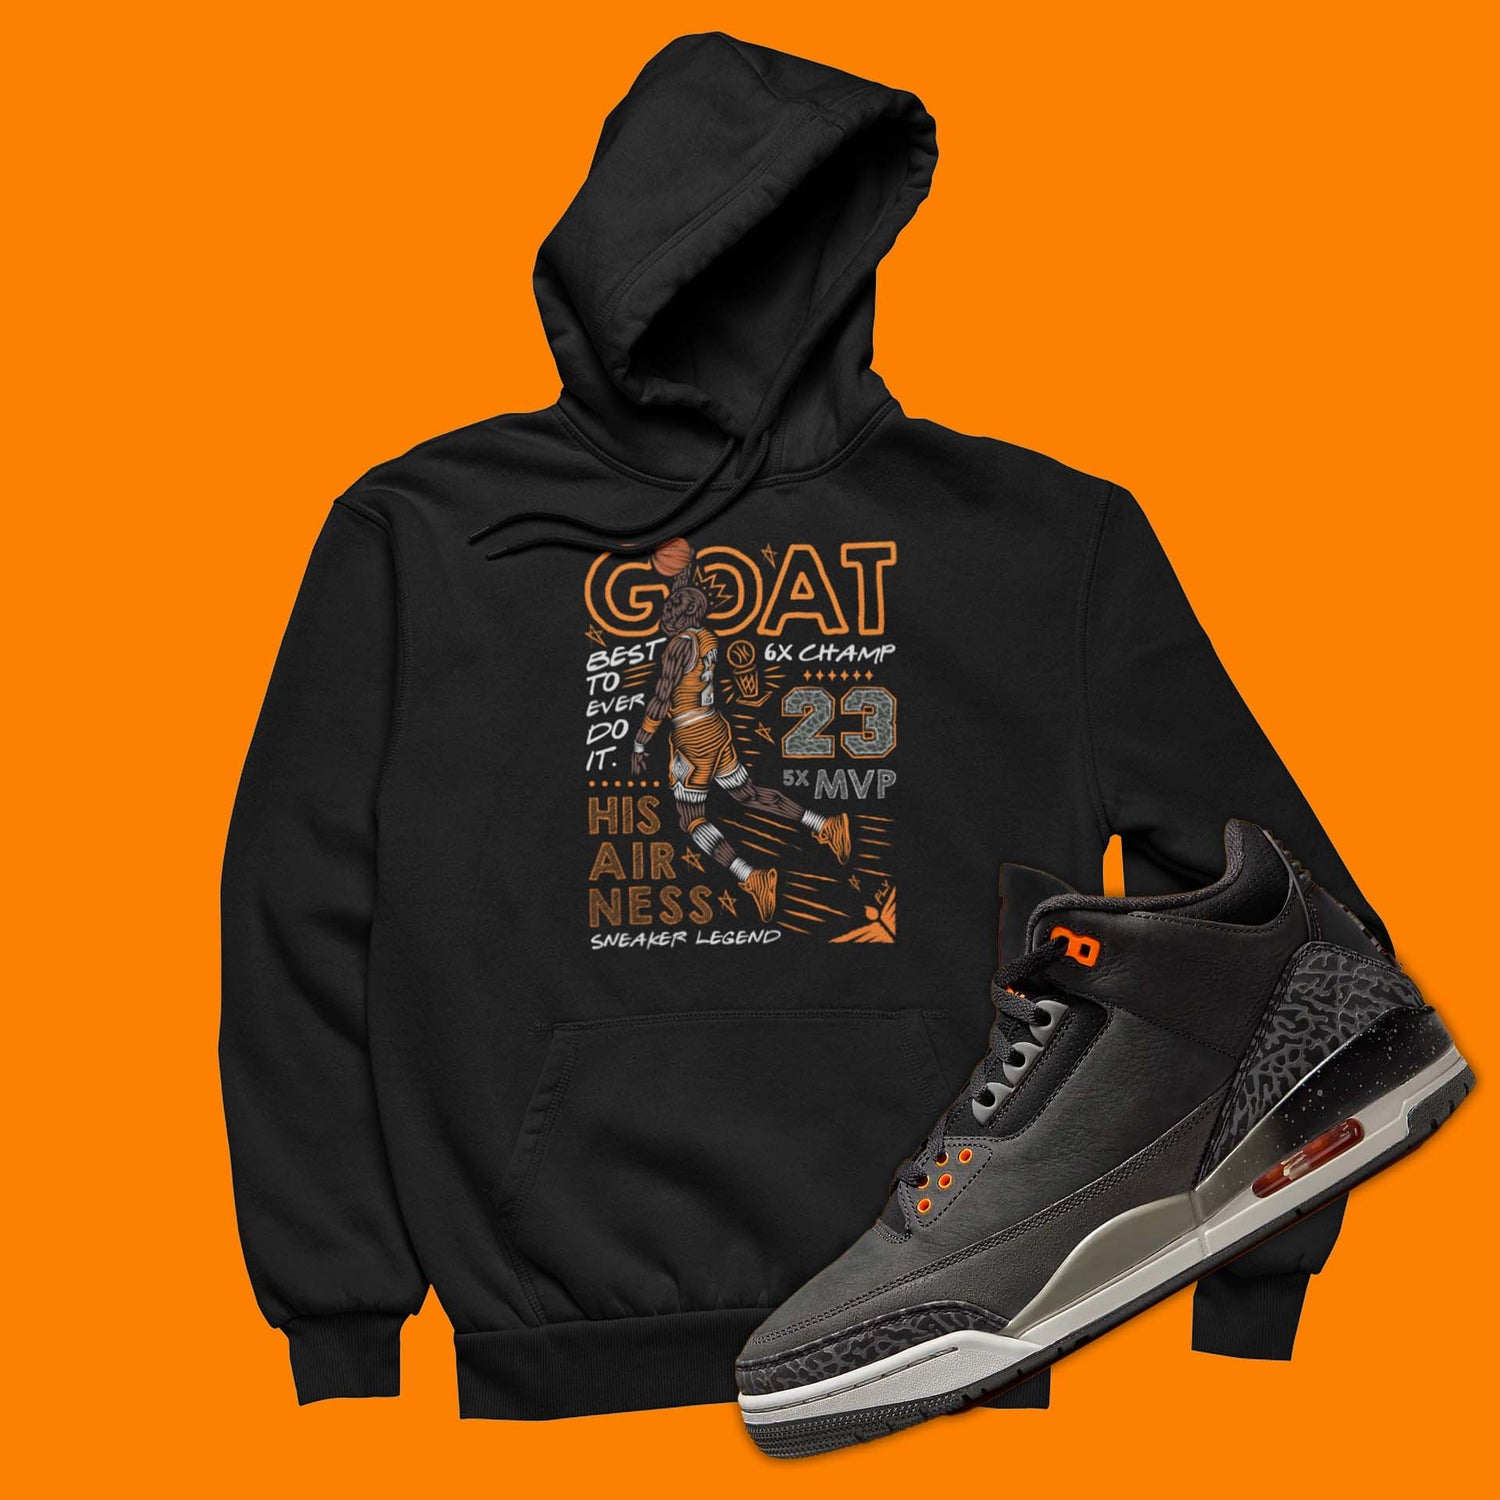 sneaker match hoodie is the perfect sweatshirt to match your Air Jordan 3 Fear Pack